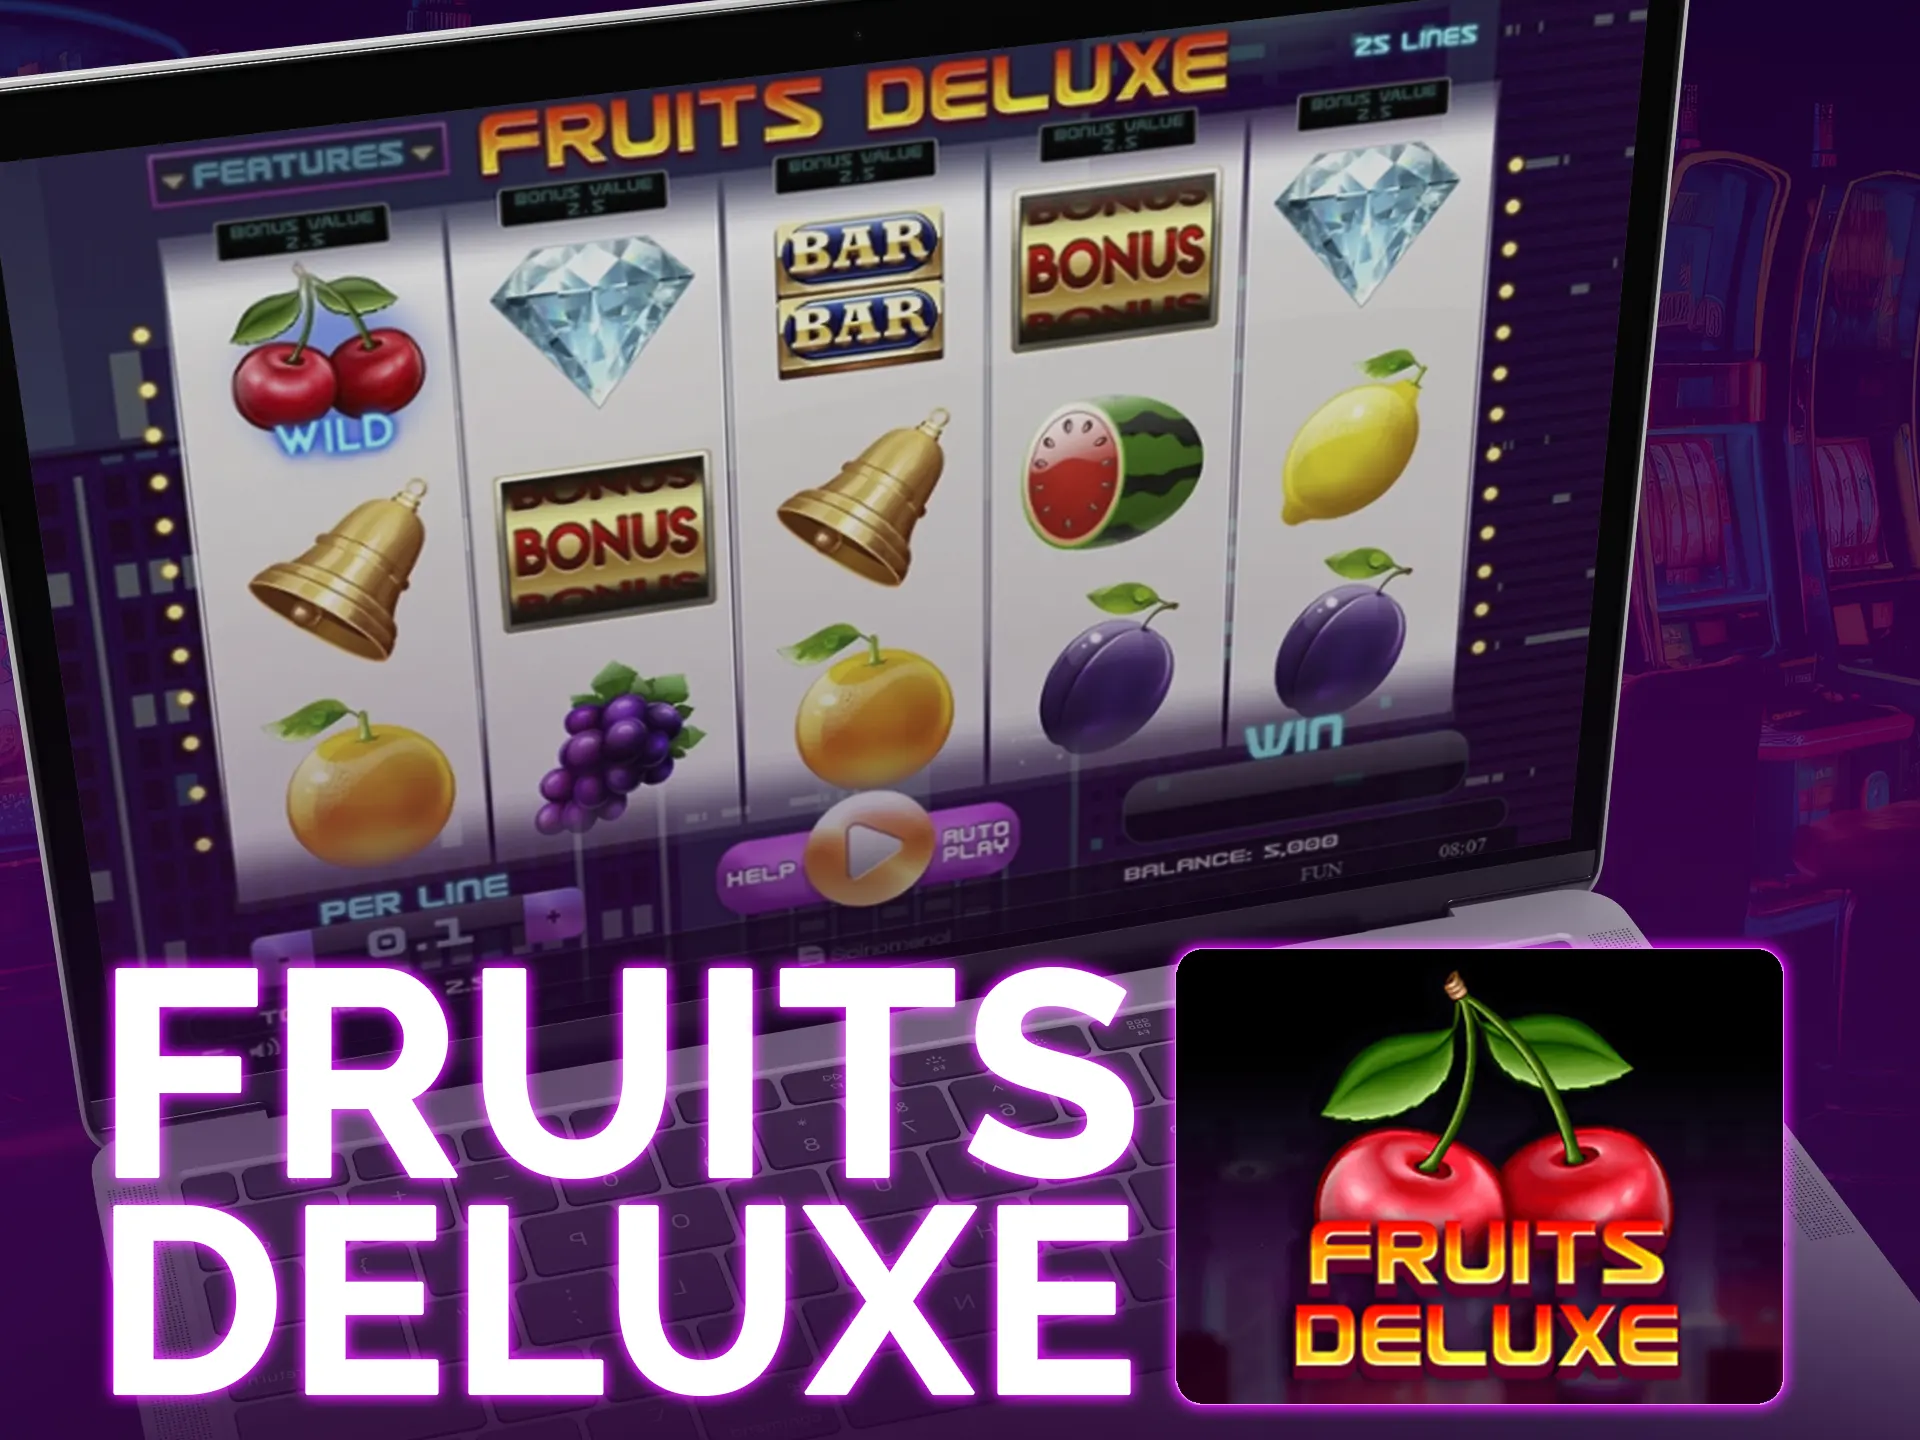 Classic-style slot, Fruits Deluxe: Fruit symbols, Wilds, Scatters, x60 max winnings.